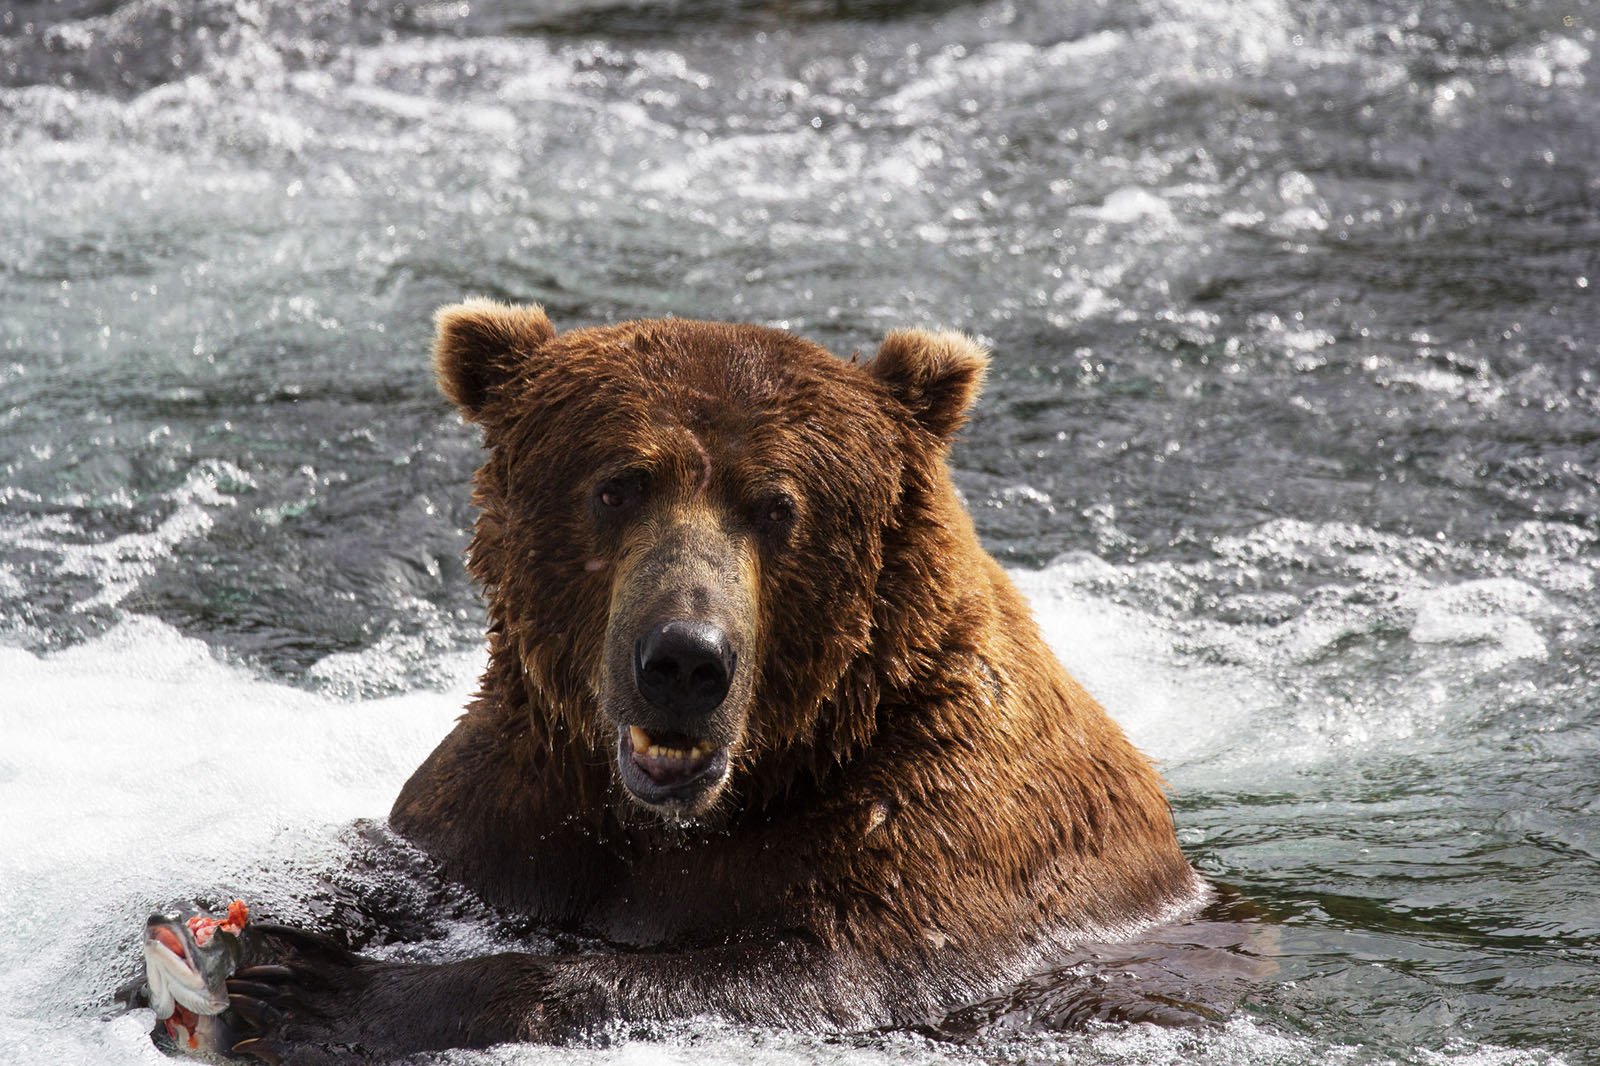 How to see Grizzly bears in Anchorage